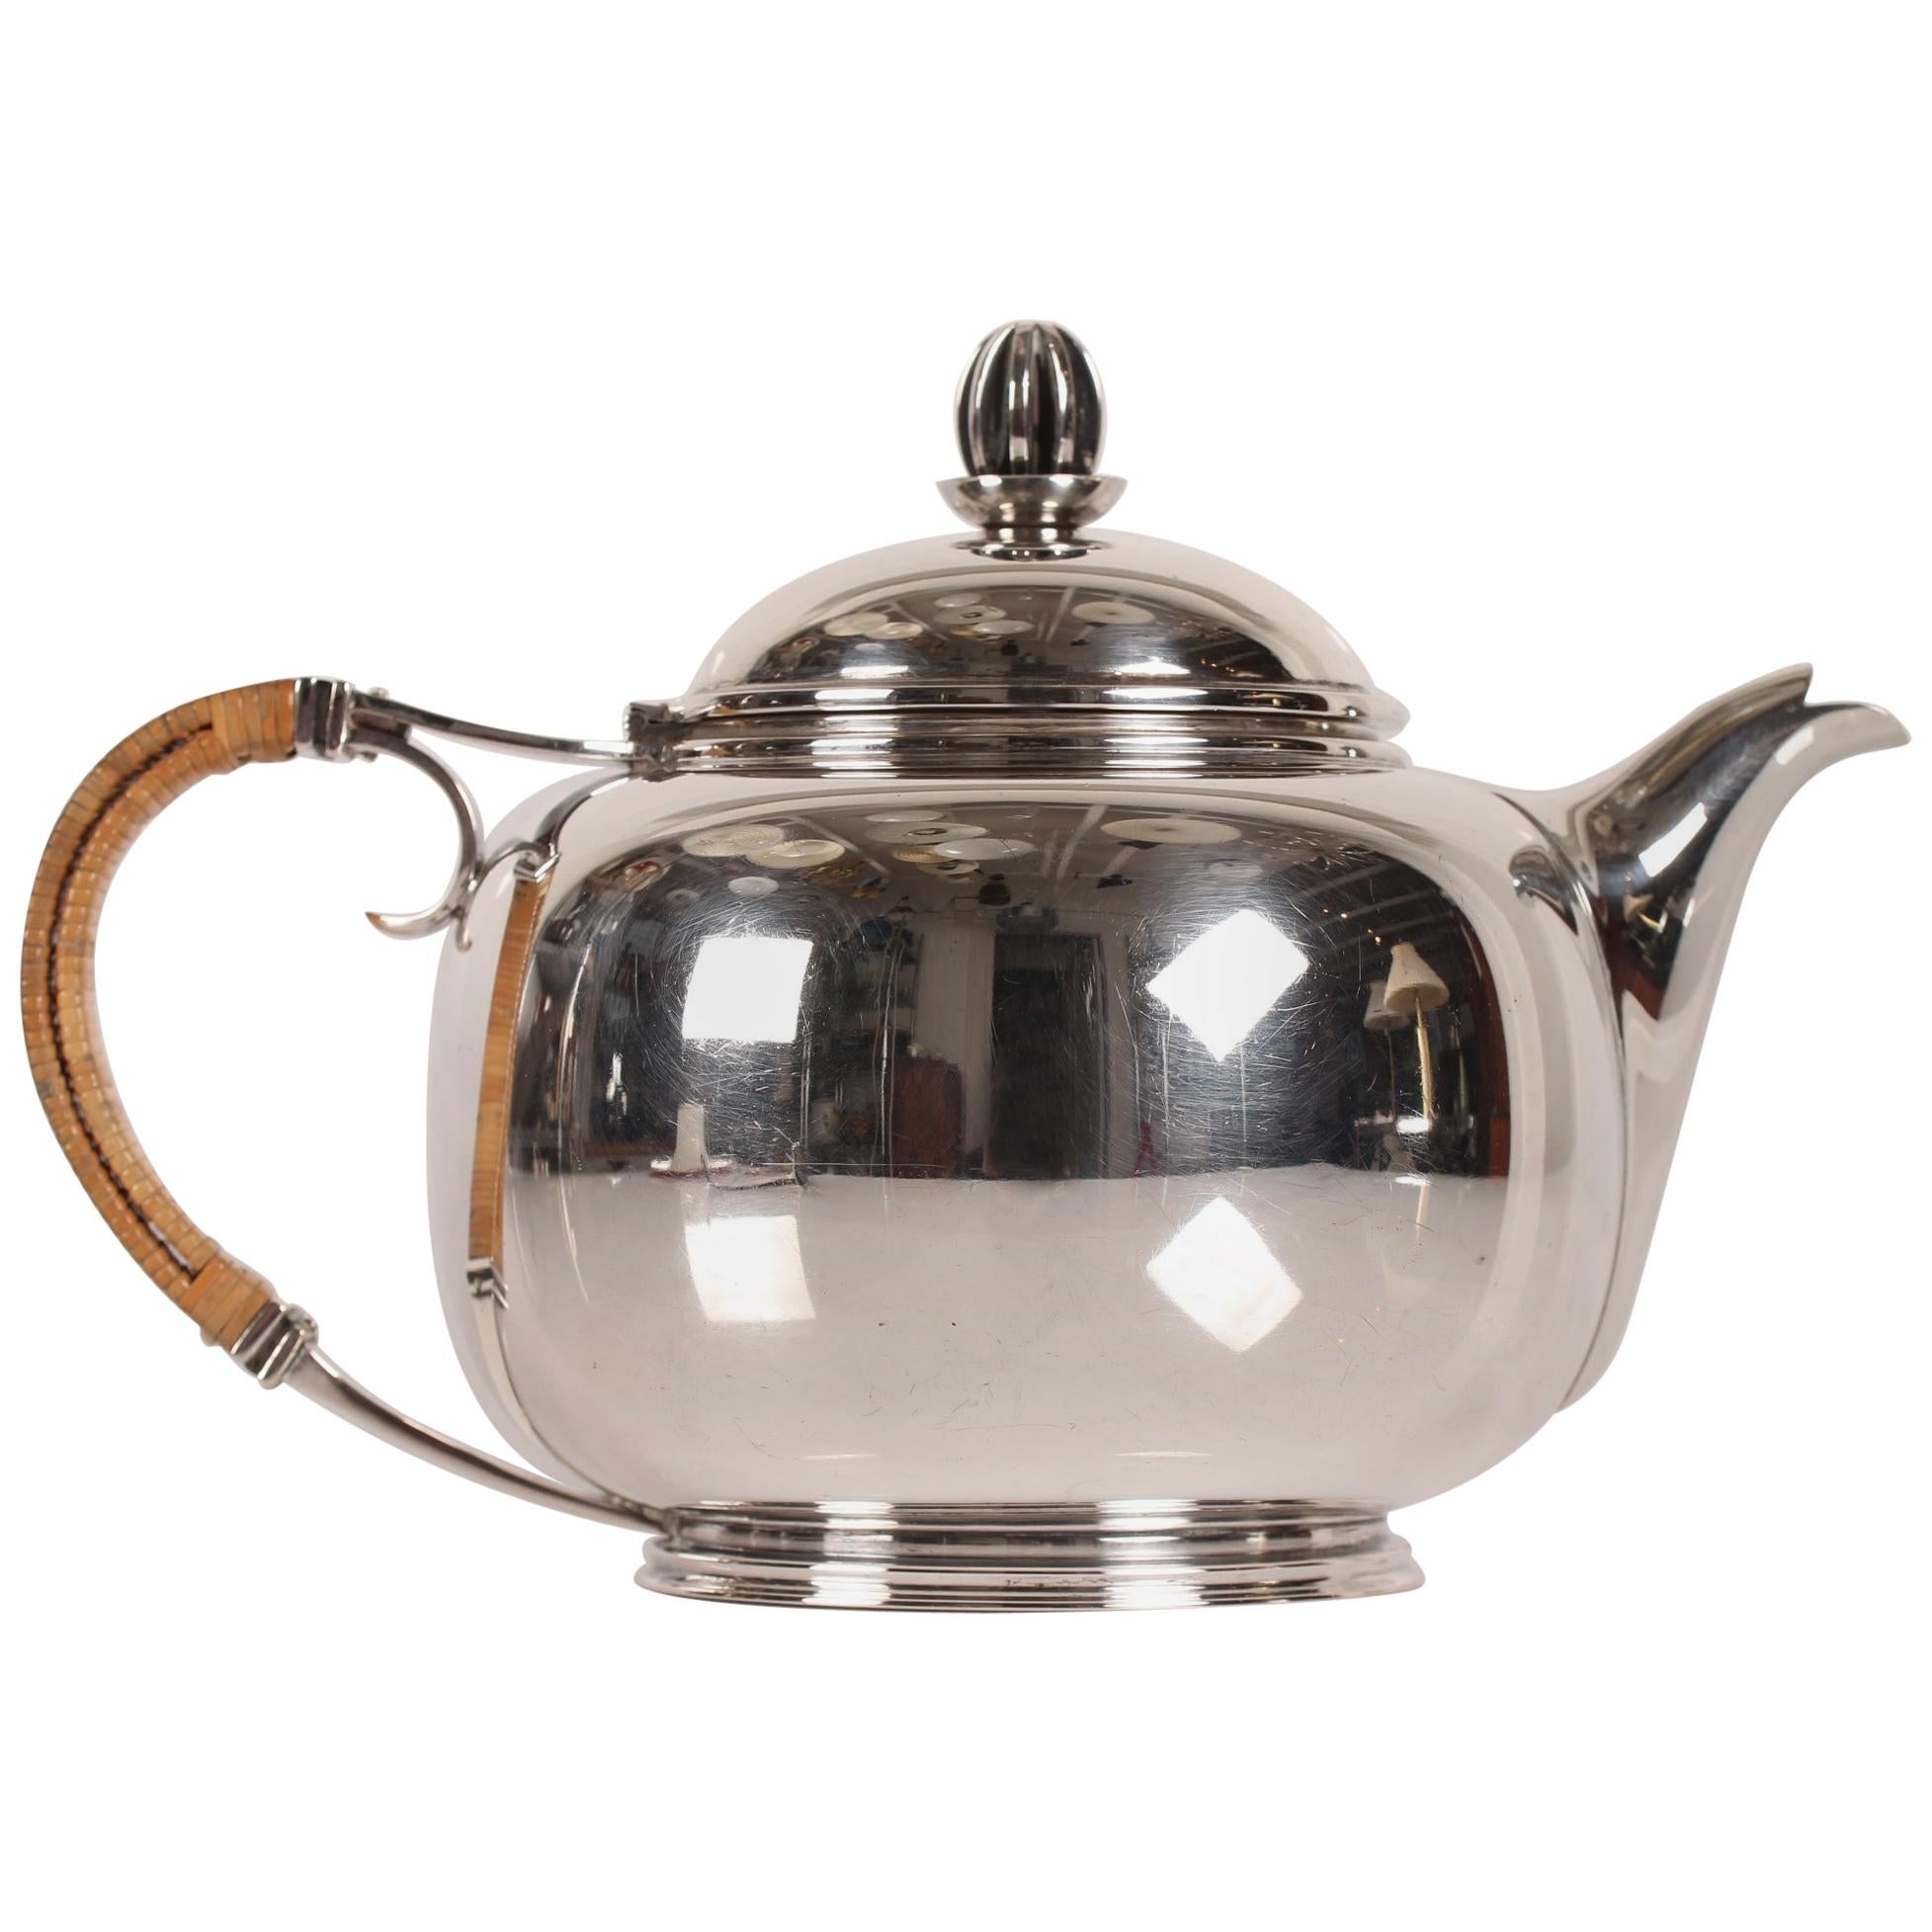 Art Deco Silver Teapot 830s with Straw Handle Made by Cohr Silver, Denmark, 1939